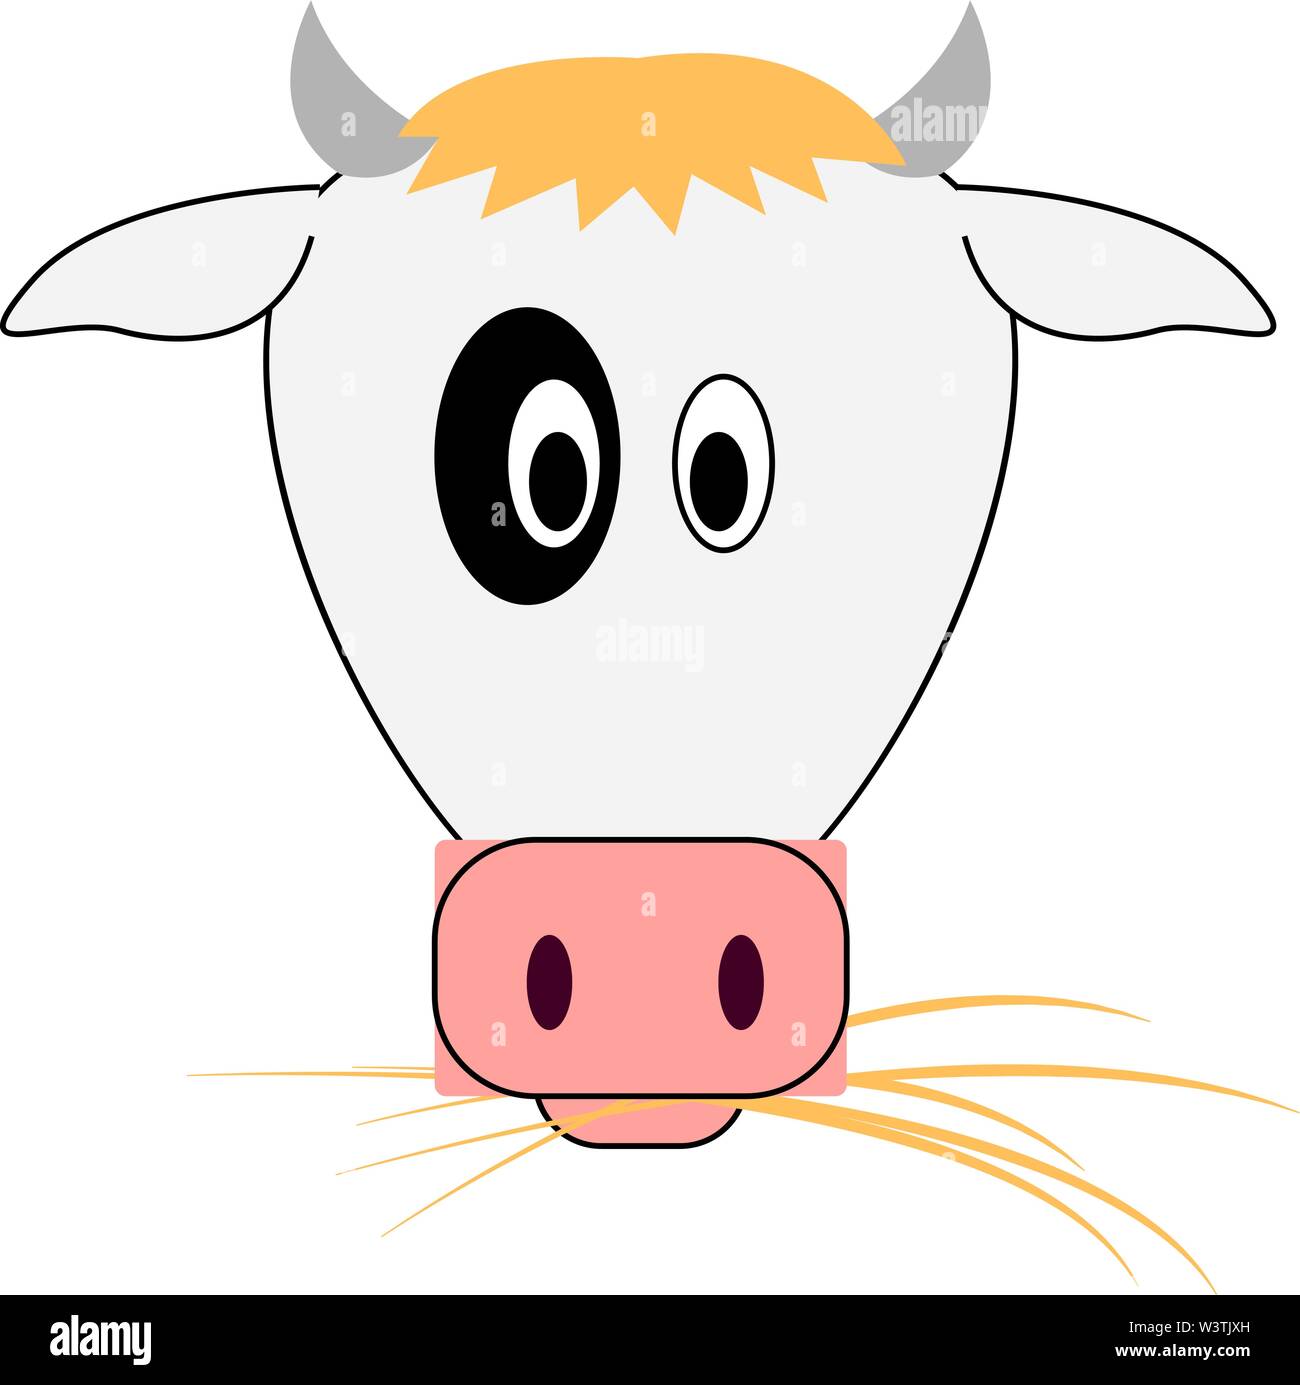 Cow eating grass, illustration, vector on white background. Stock Vector